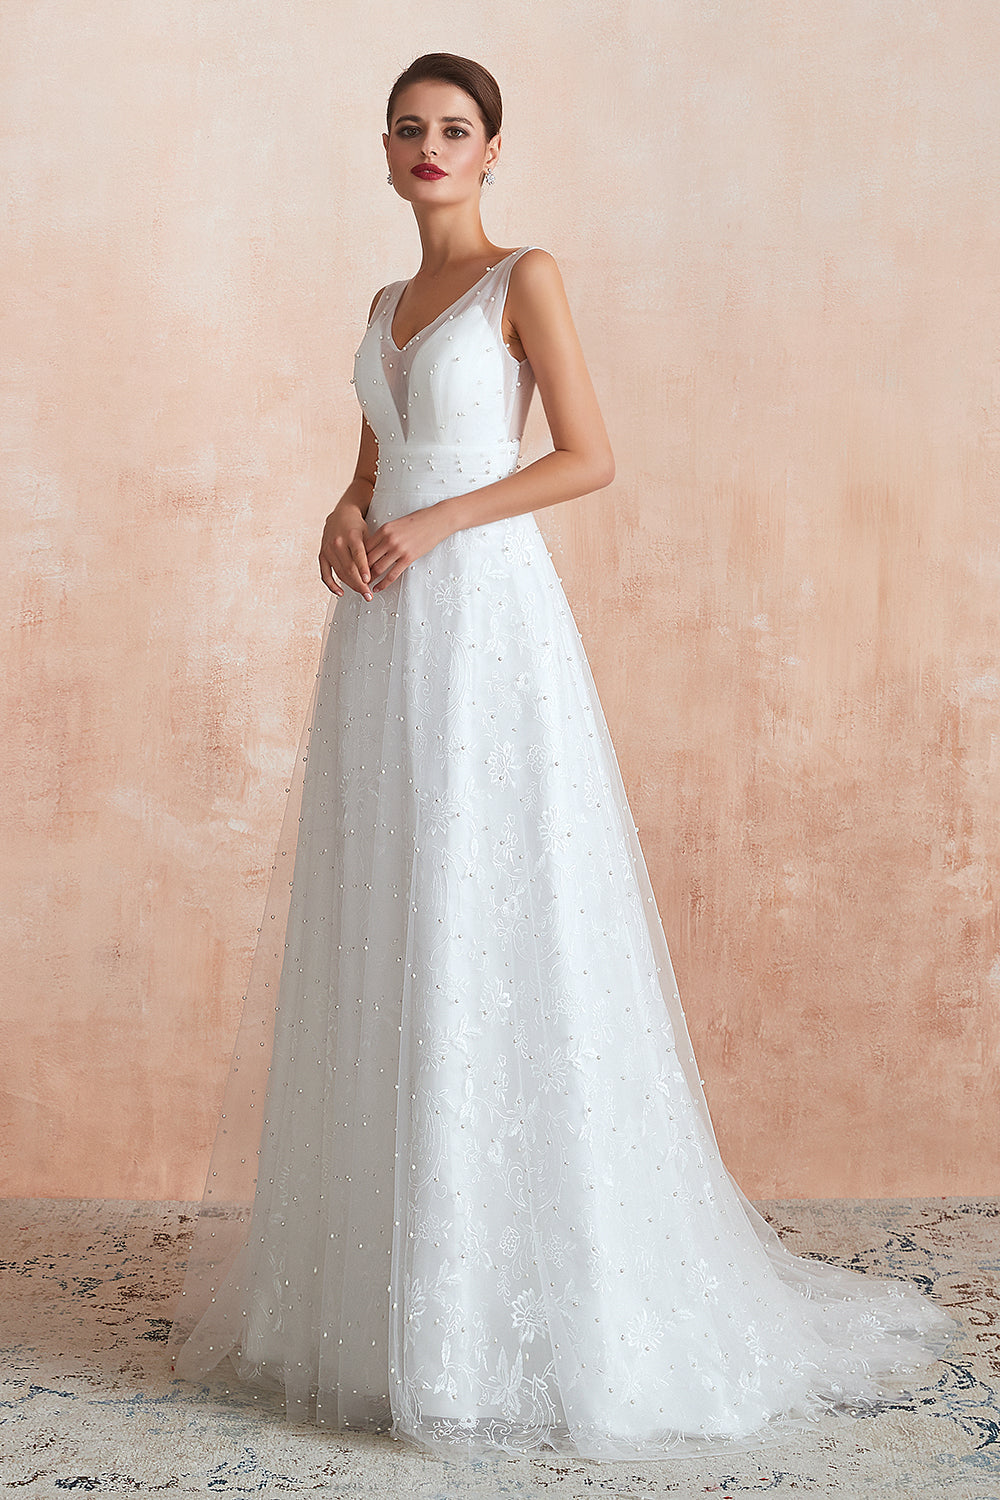 Fantastic V-Neck Sleeveless White Appliques Wedding Dress With Pearls-27dress